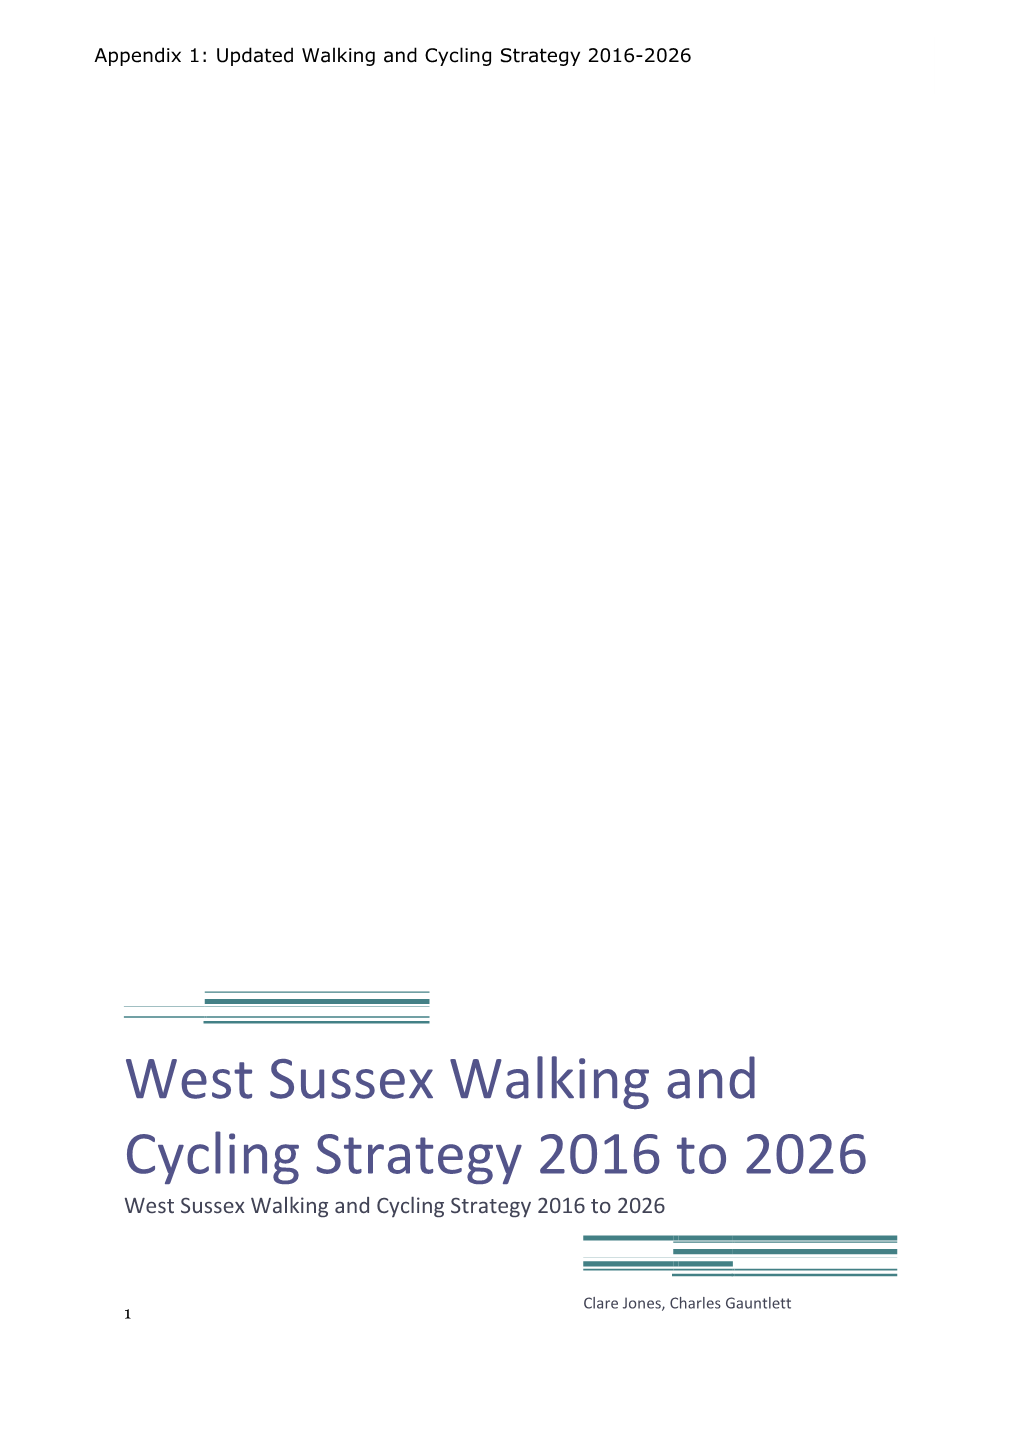 West Sussex Walking and Cycling Strategy 2016 to 2026 West Sussex Walking and Cycling Strategy 2016 to 2026